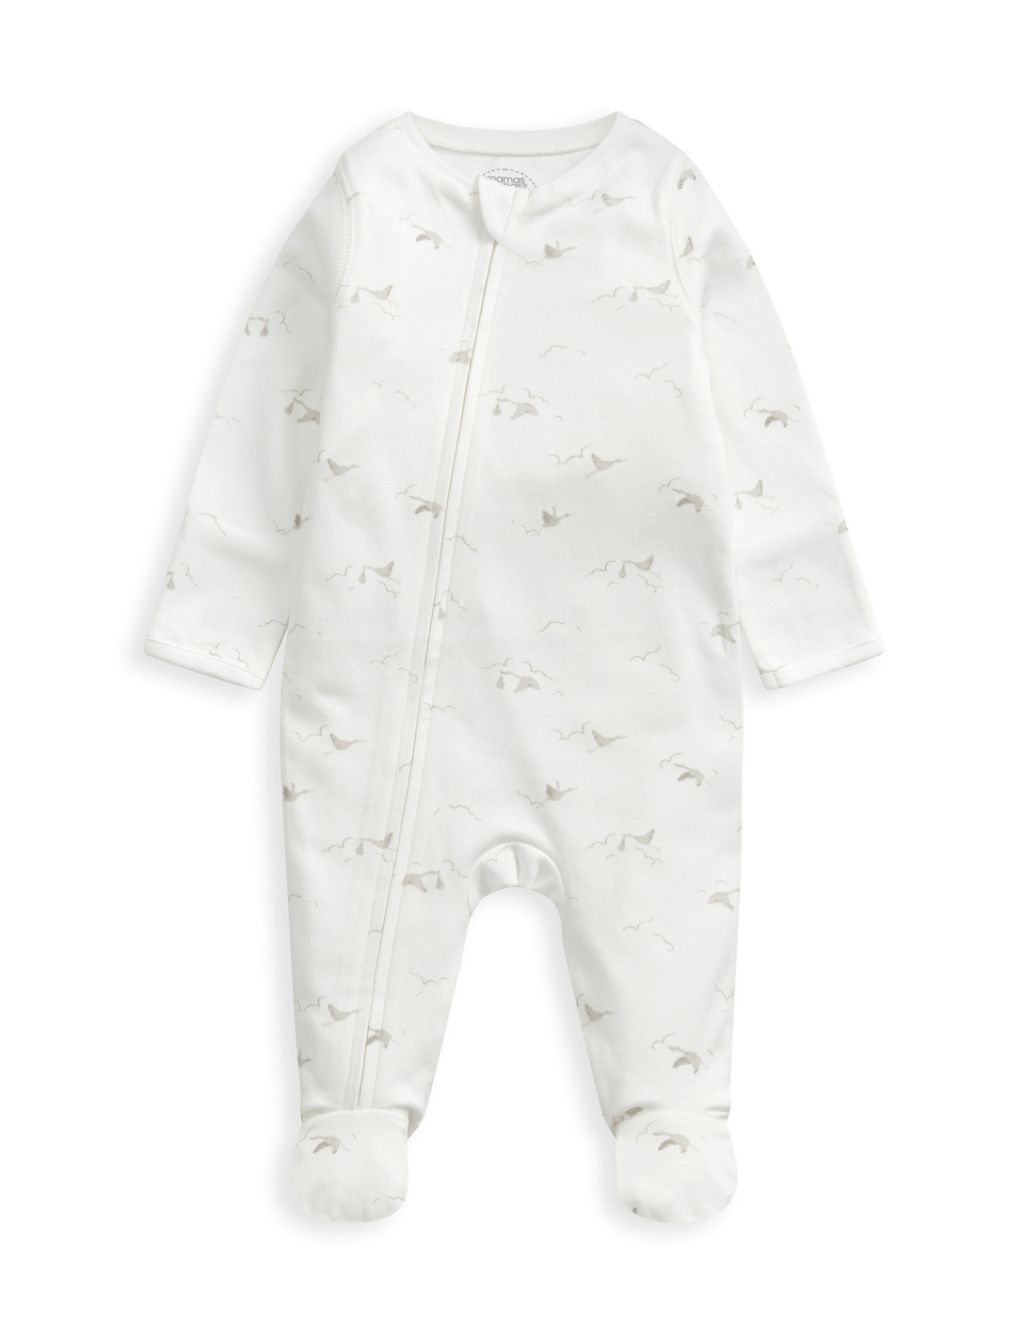 Stork Print Zip All In One (6½lbs-12 Mths) 1 of 5